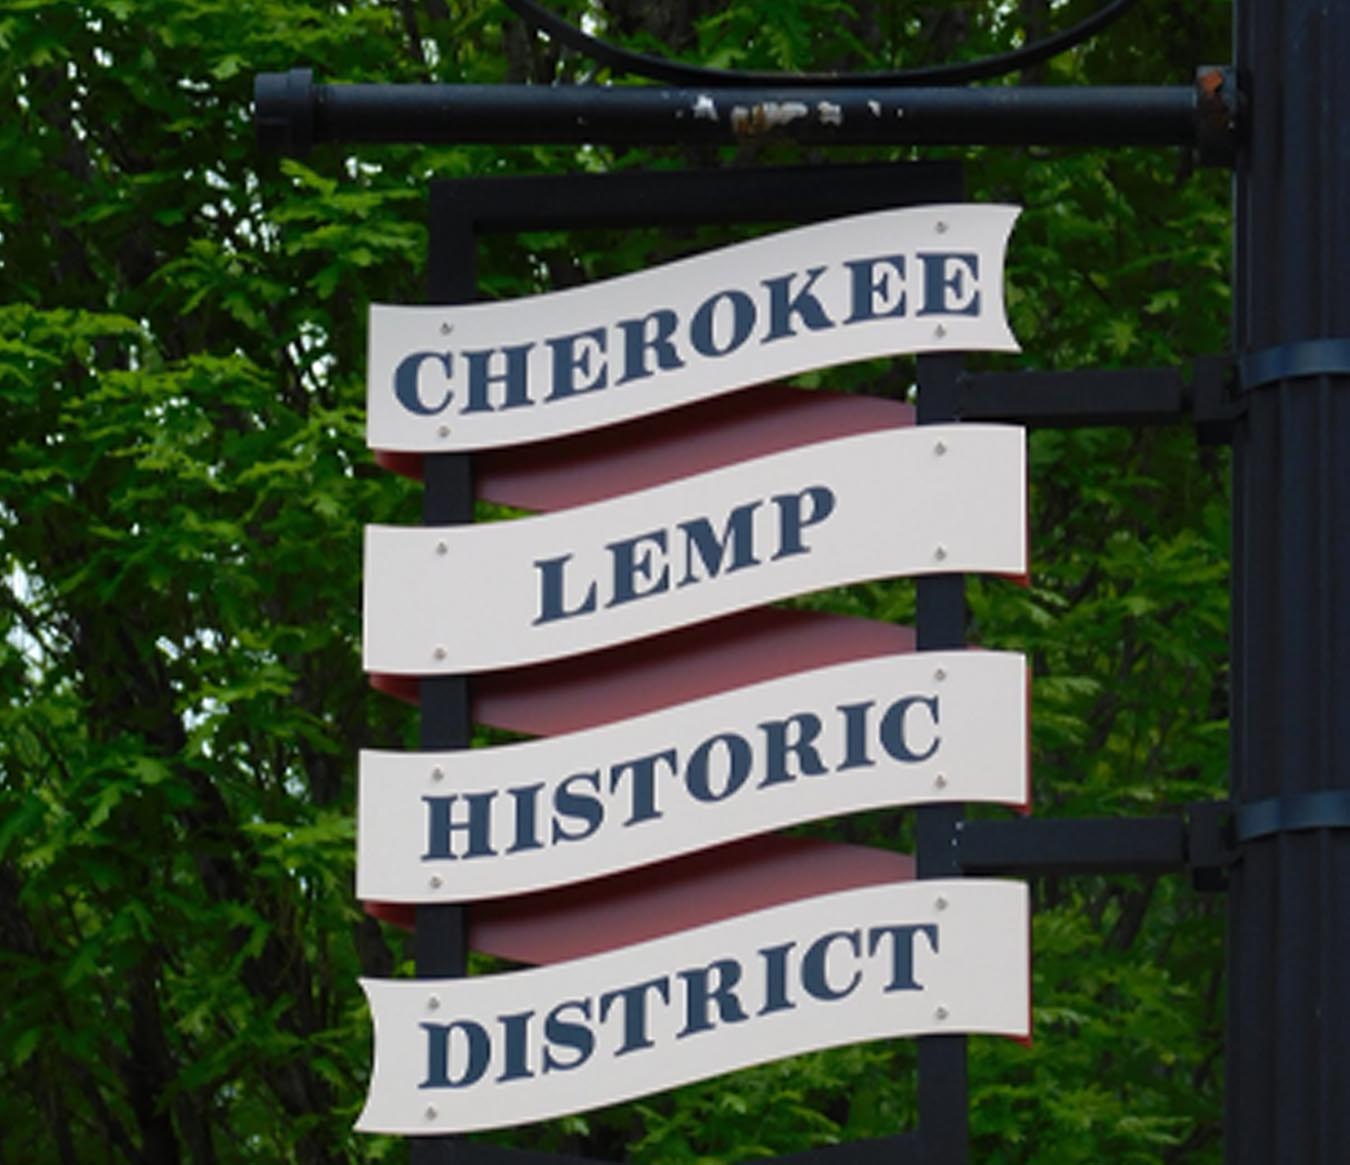 Things to Do in St. Louis - Cherokee-Lemp Historic District 